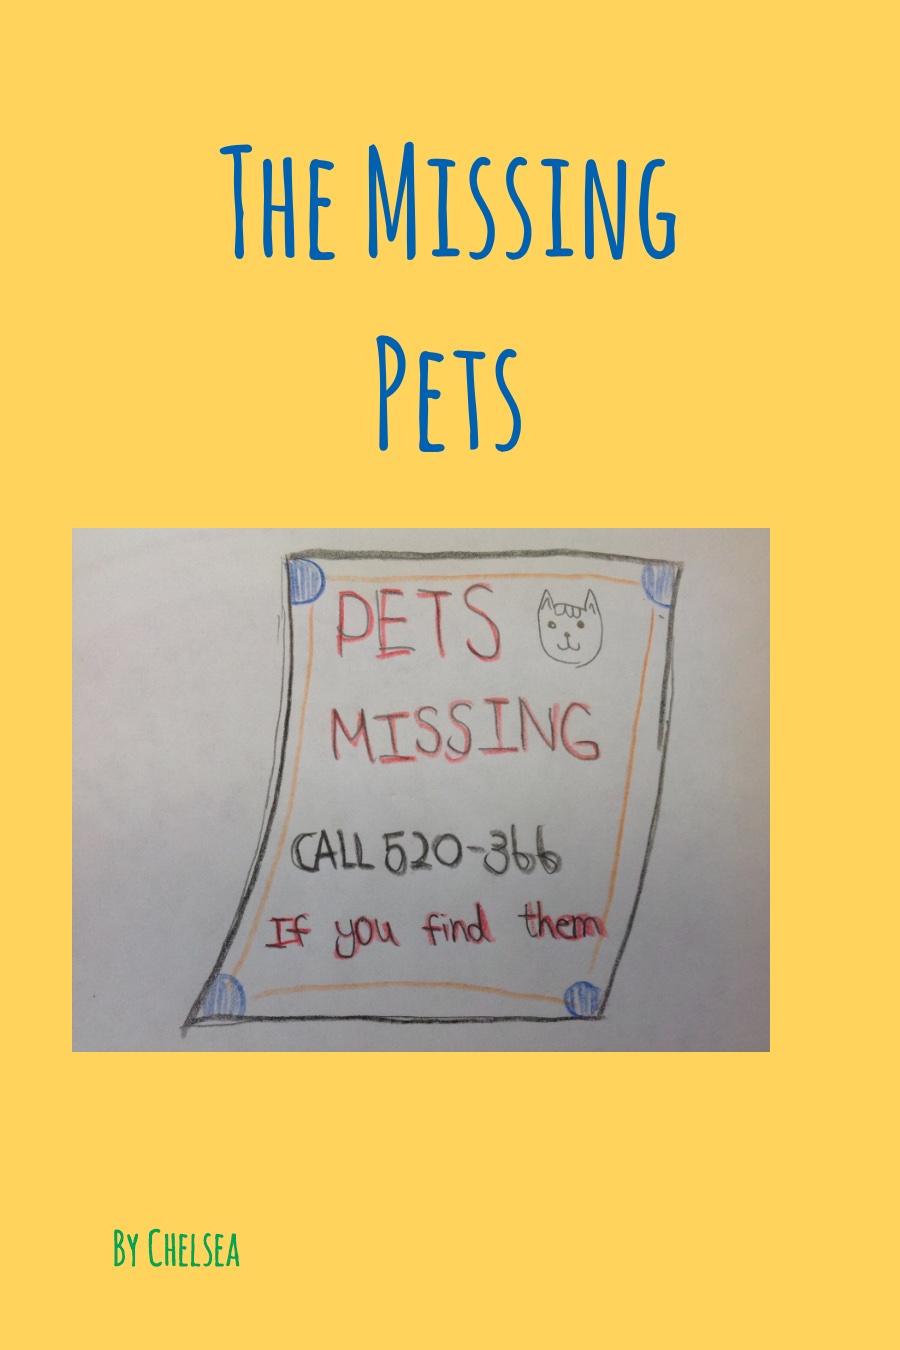 The Missing Pets by Chelsea L